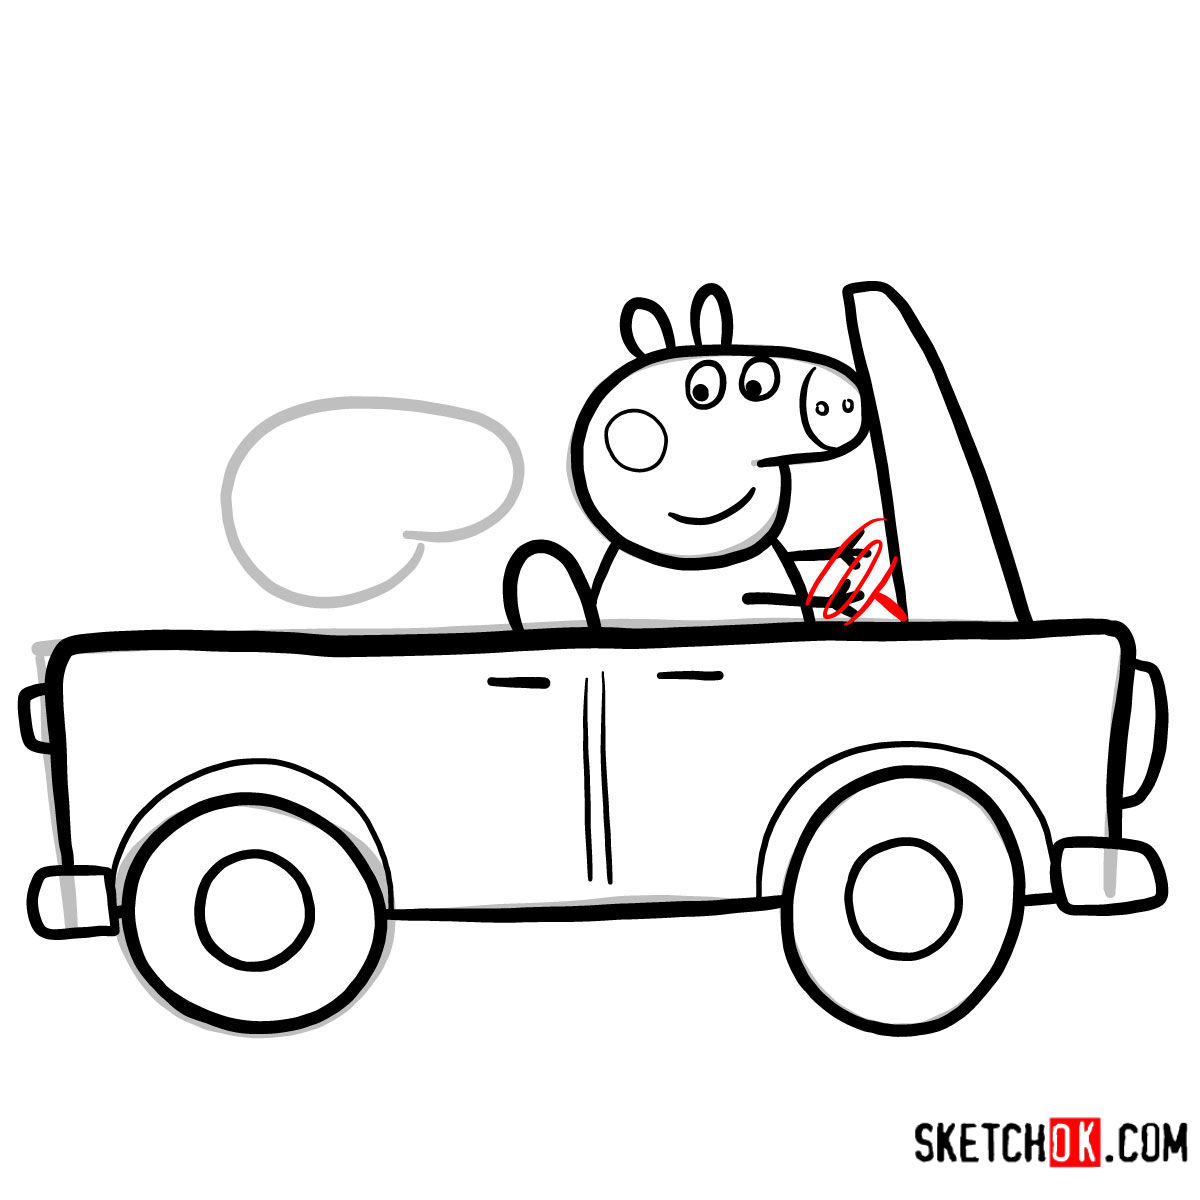 How to draw George Pig with Mummy Pig riding a car - step 08